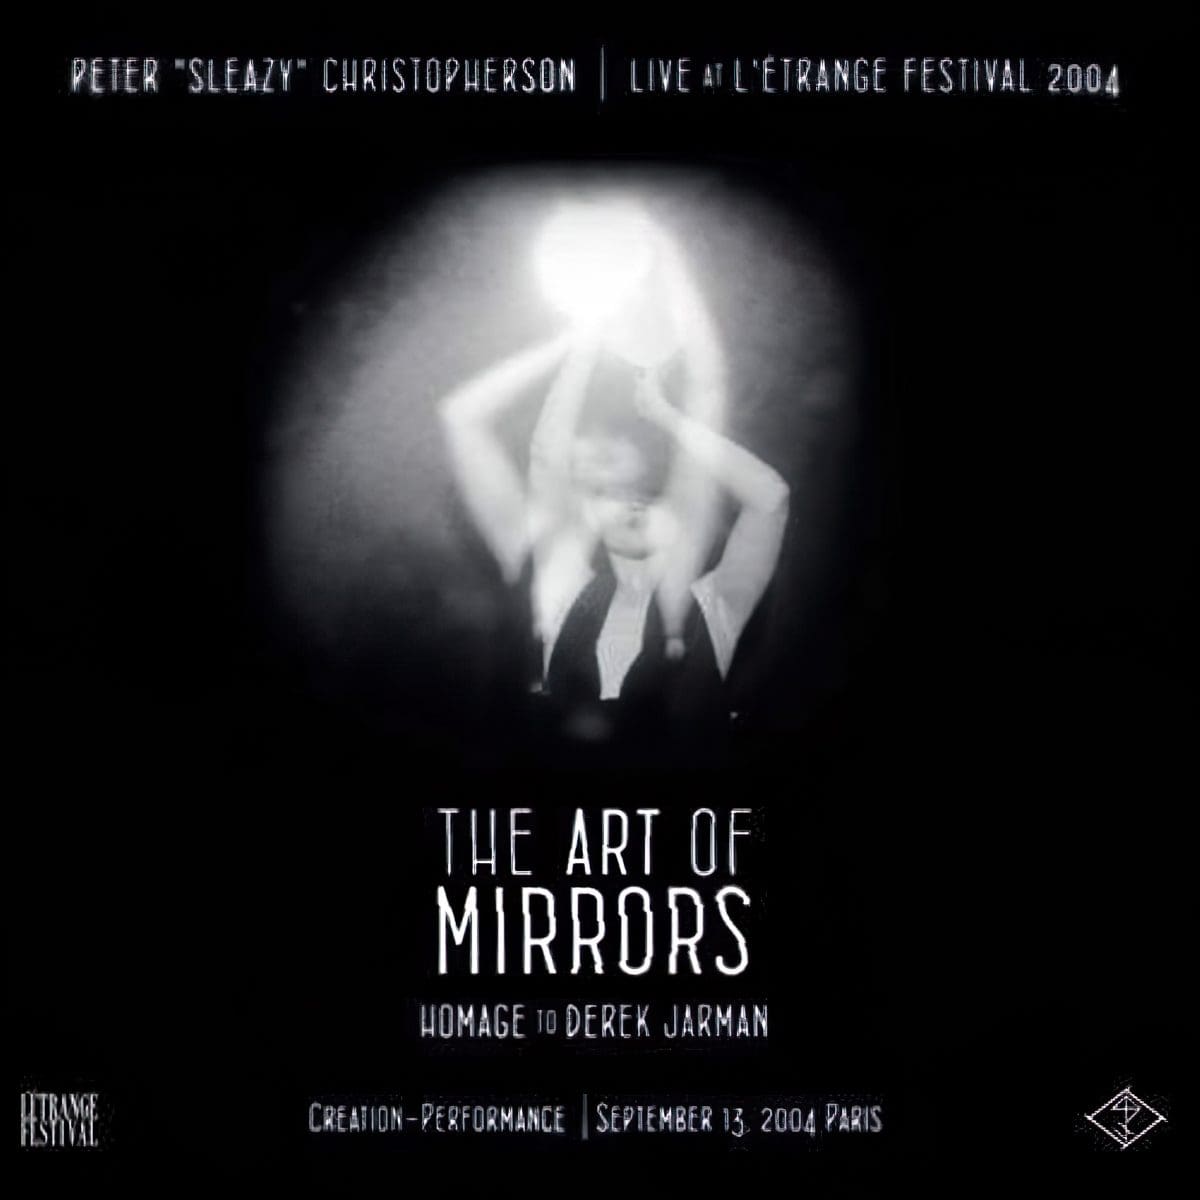 Peter ‘Sleazy’ Christopherson’s ‘Live at L’étrange Festival 2004’ re-released by Soleilmoon